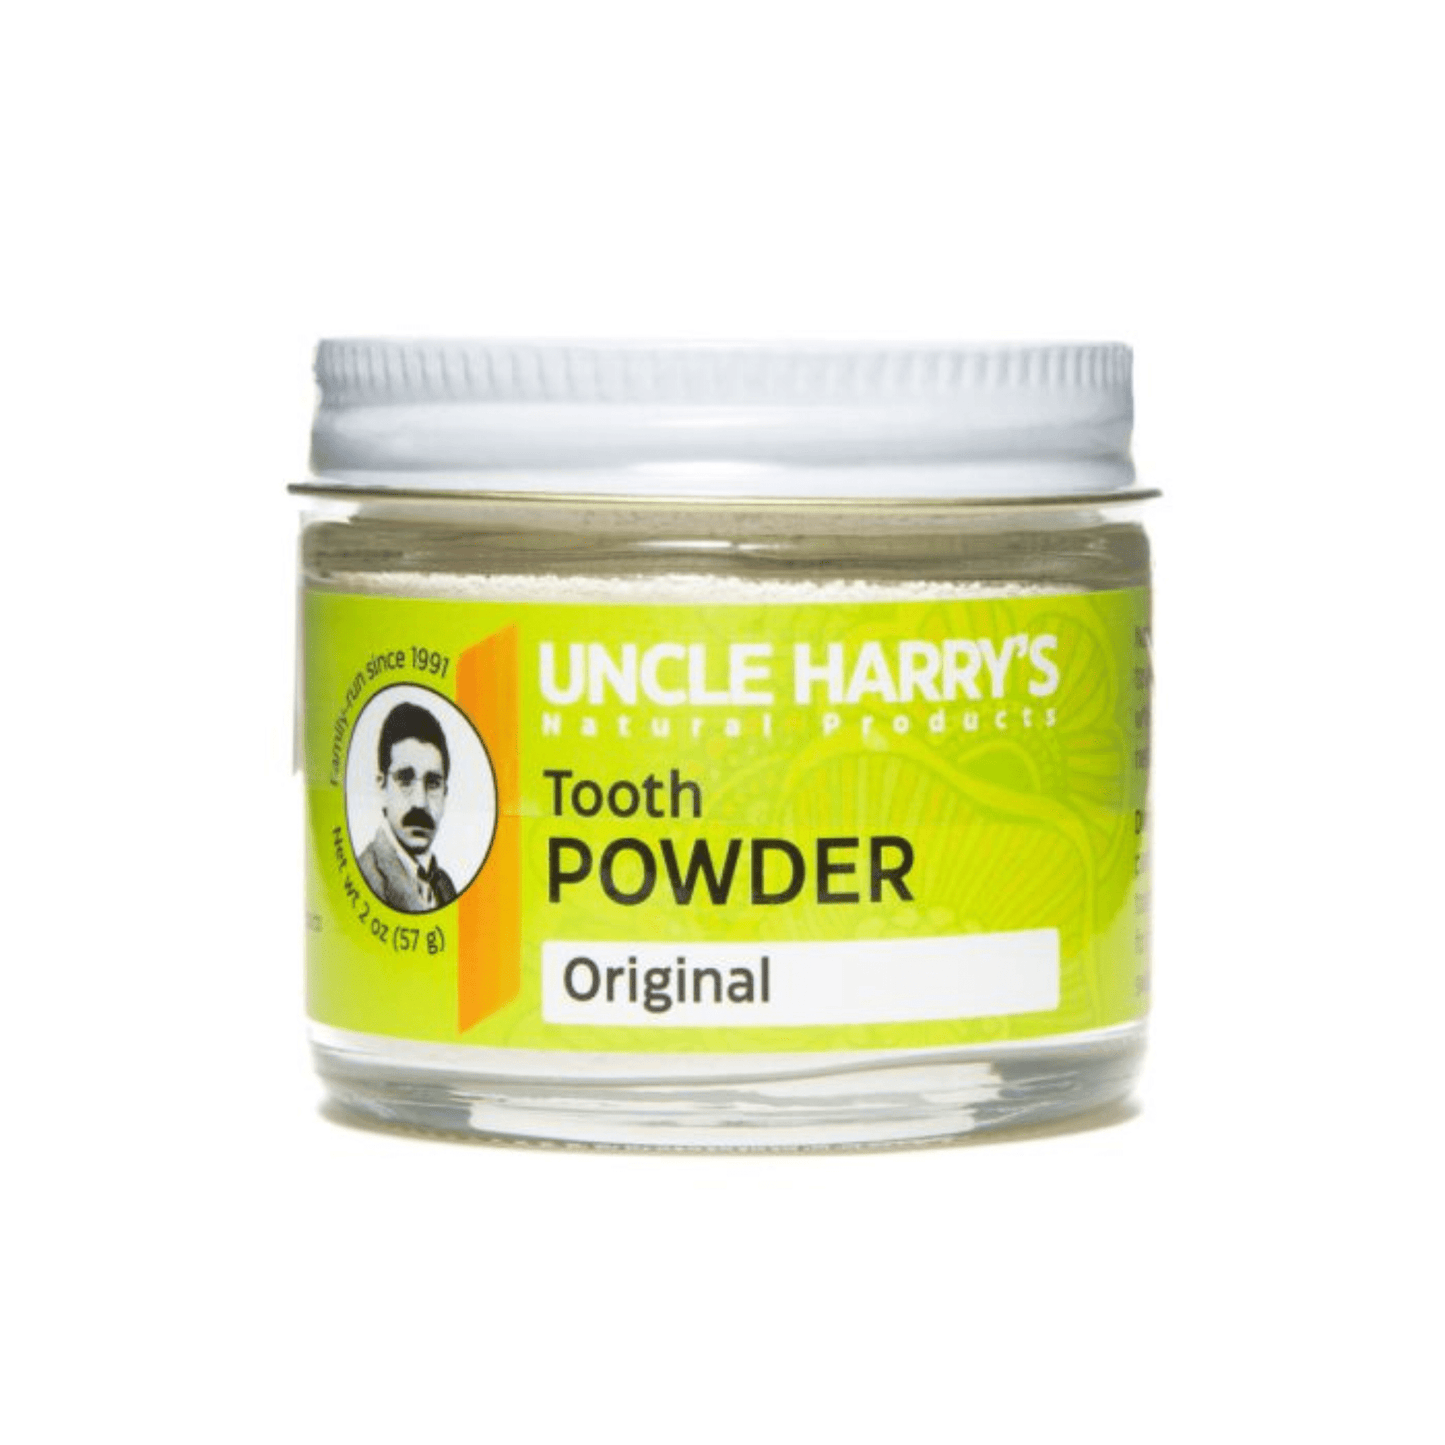 Primary Image of All-Natural Tooth Powder Jar